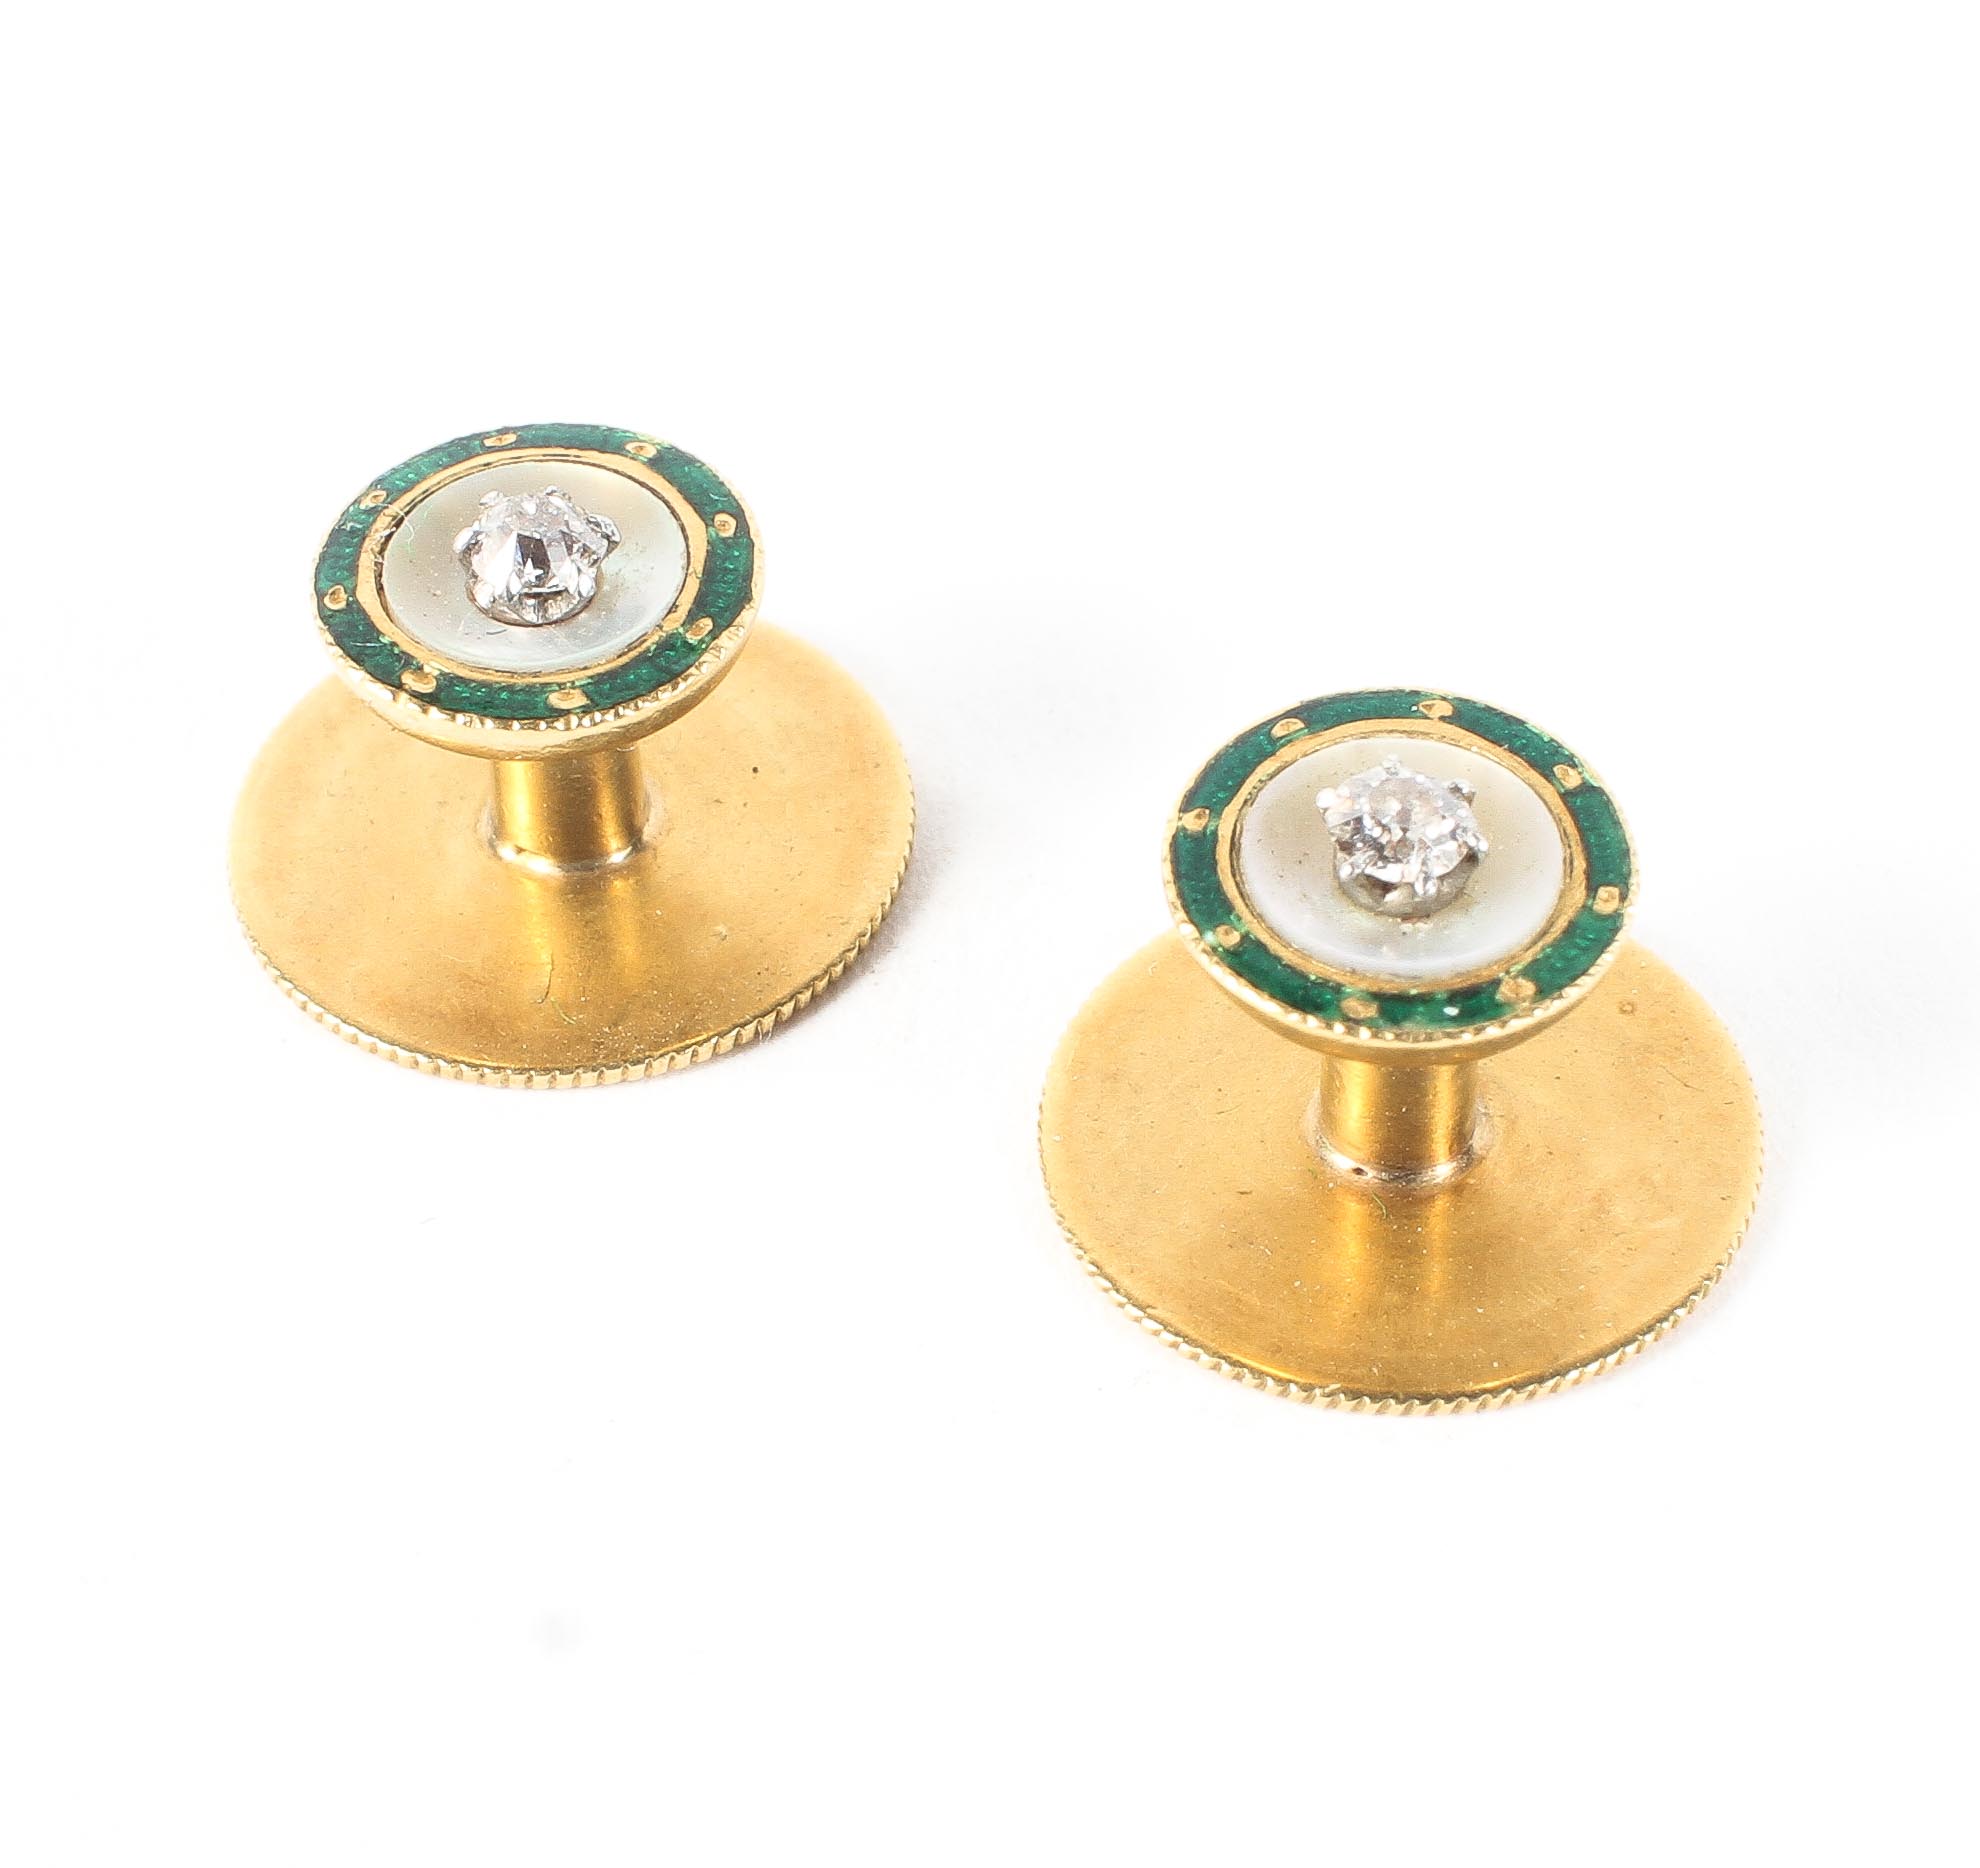 A pair of 18ct diamond collar studs by West & Son Dublin, - Image 2 of 3